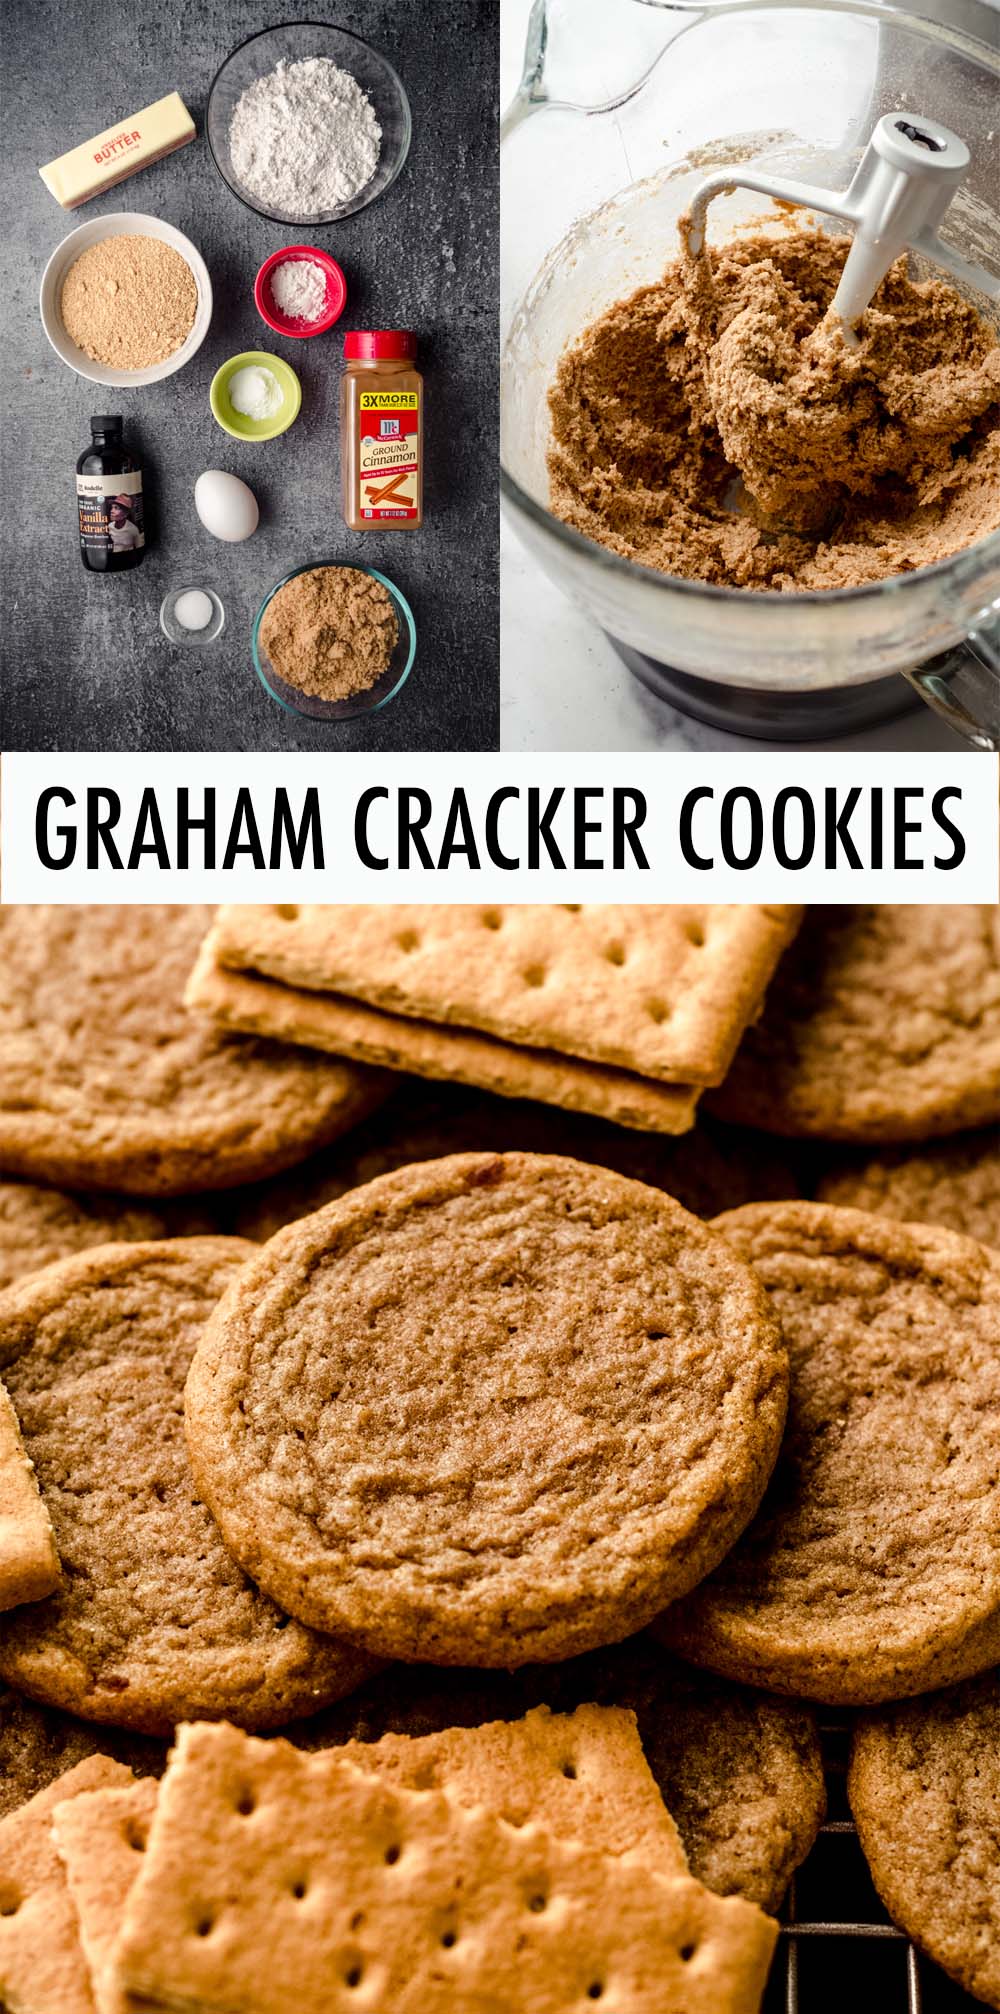 These brown sugar cookies are made with crushed graham cracker crumbs to create a melt-in-your-mouth buttery, soft, and chewy texture that pack all the flavor of traditional graham crackers. via @frshaprilflours